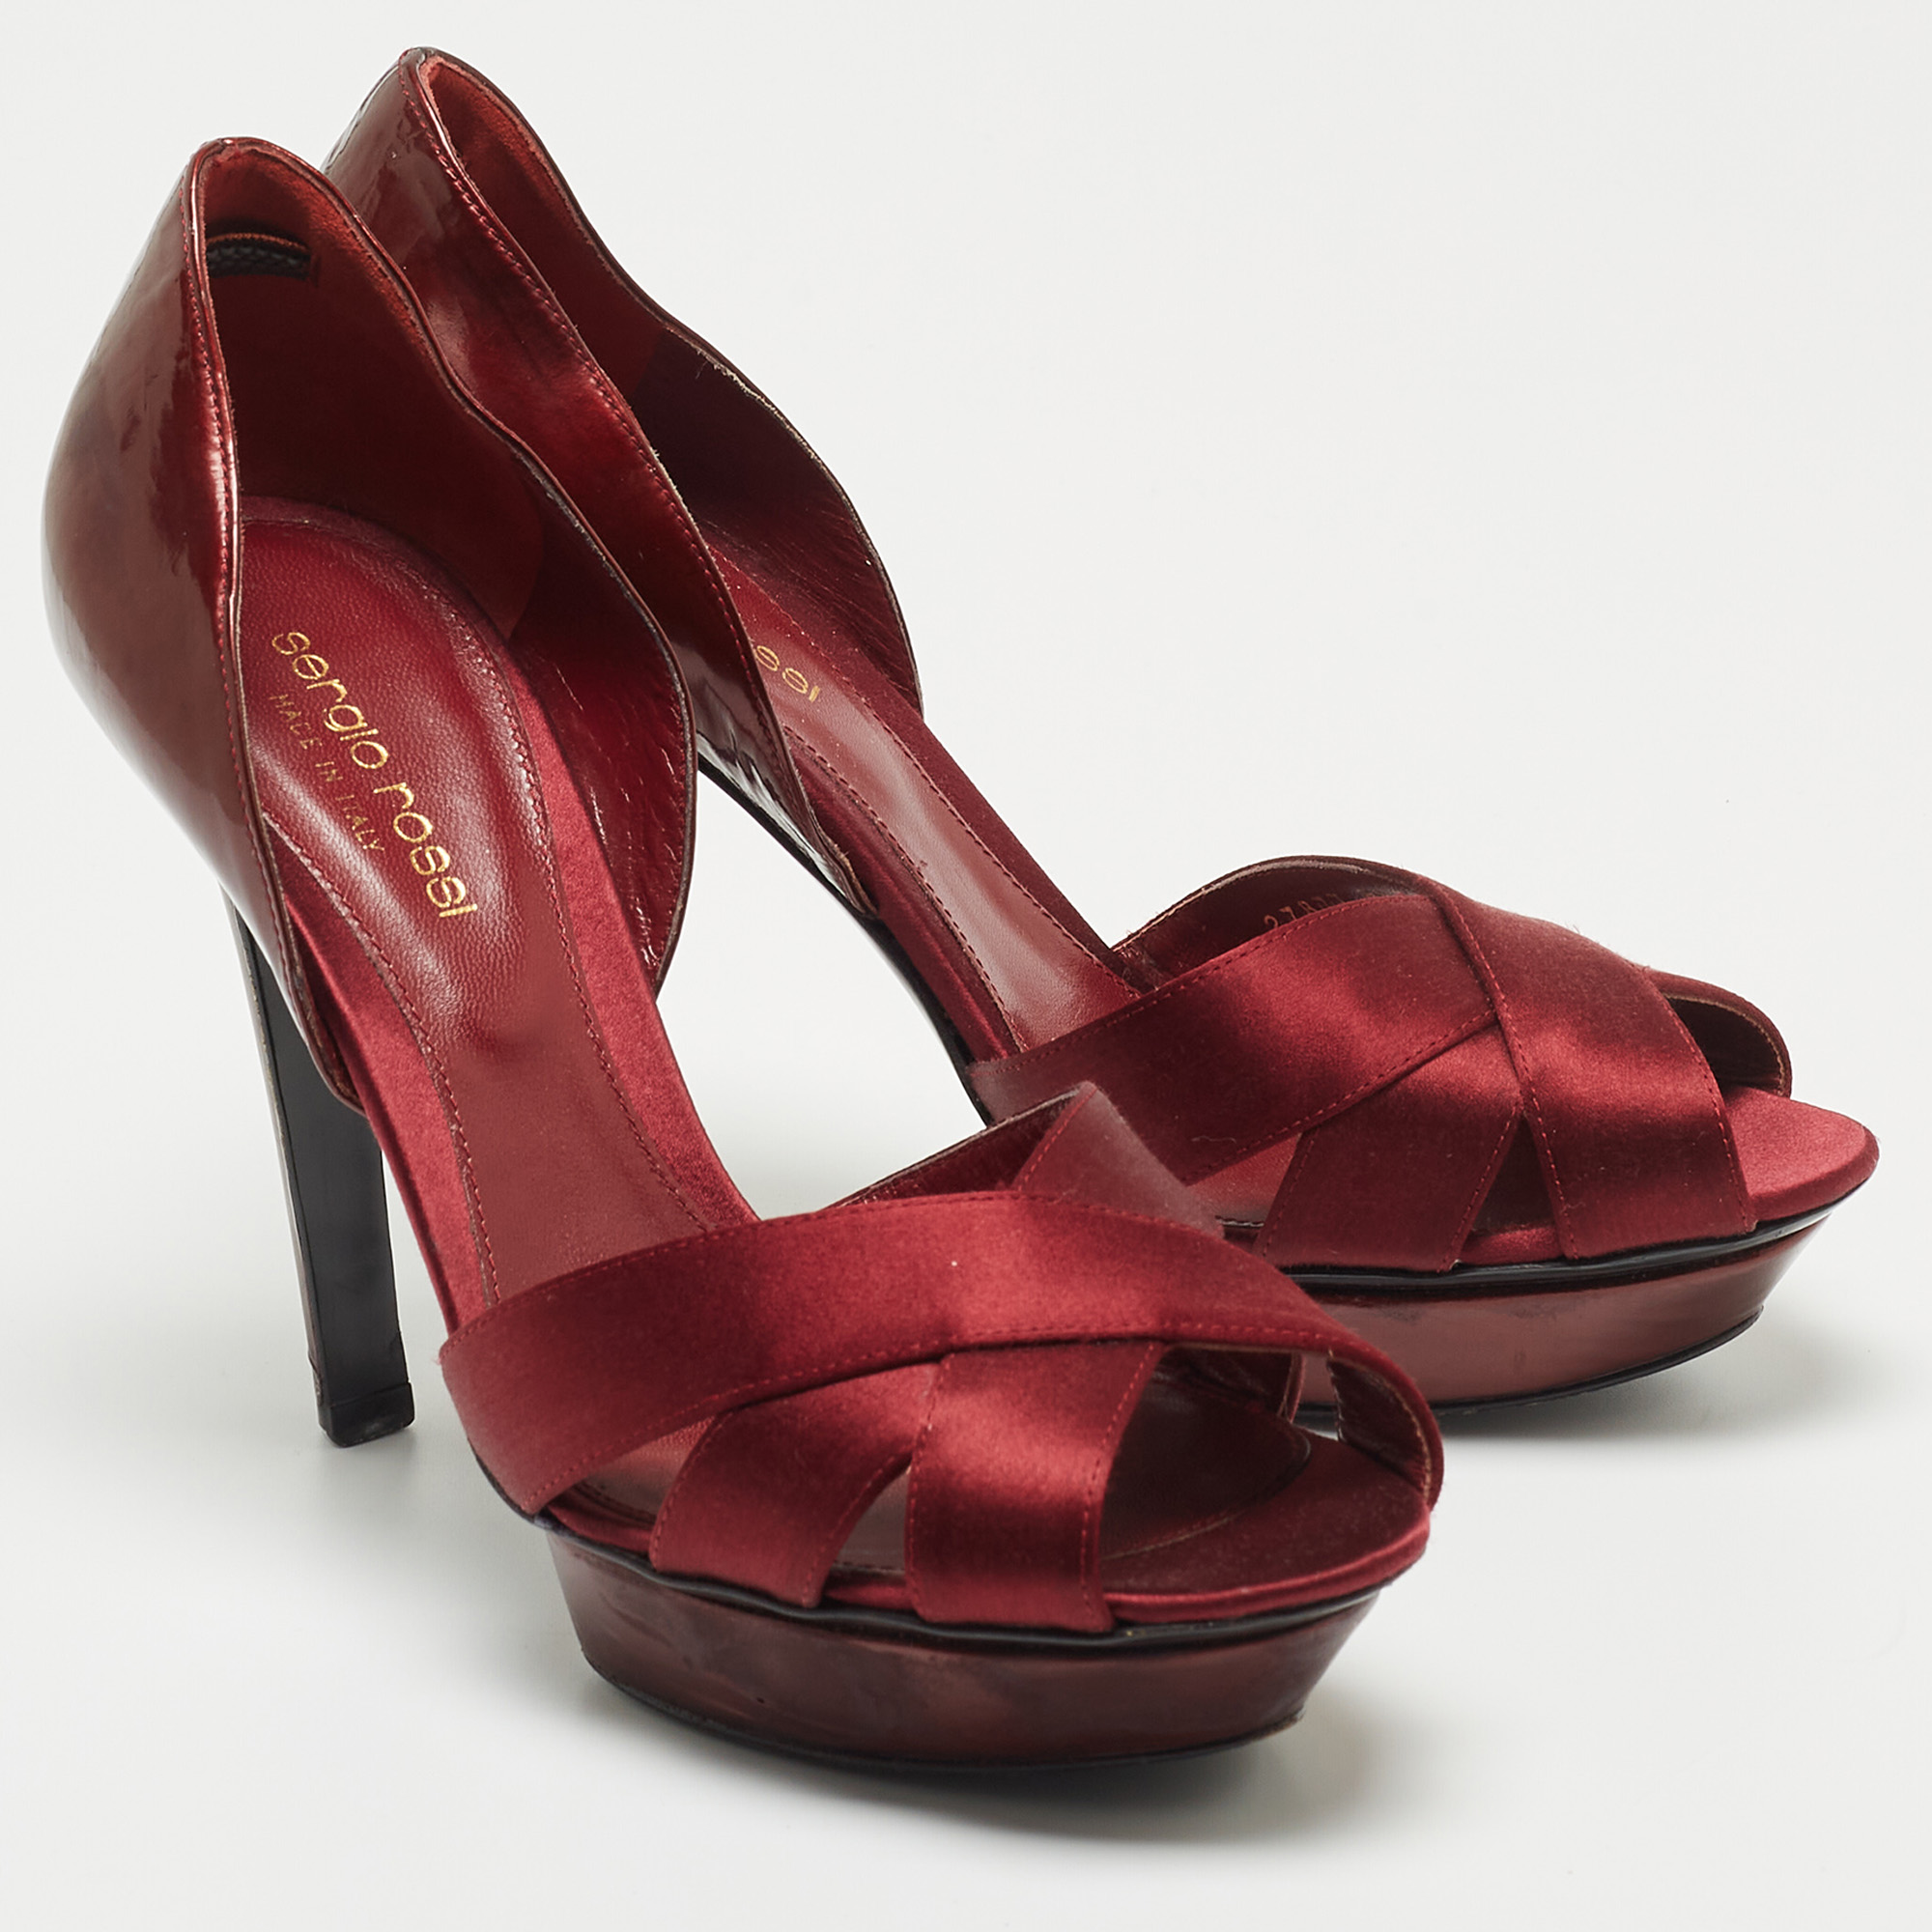 Sergio Rossi Burgundy Satin And Patent Leather Open Toe Platform D'orsay Pumps Size 38